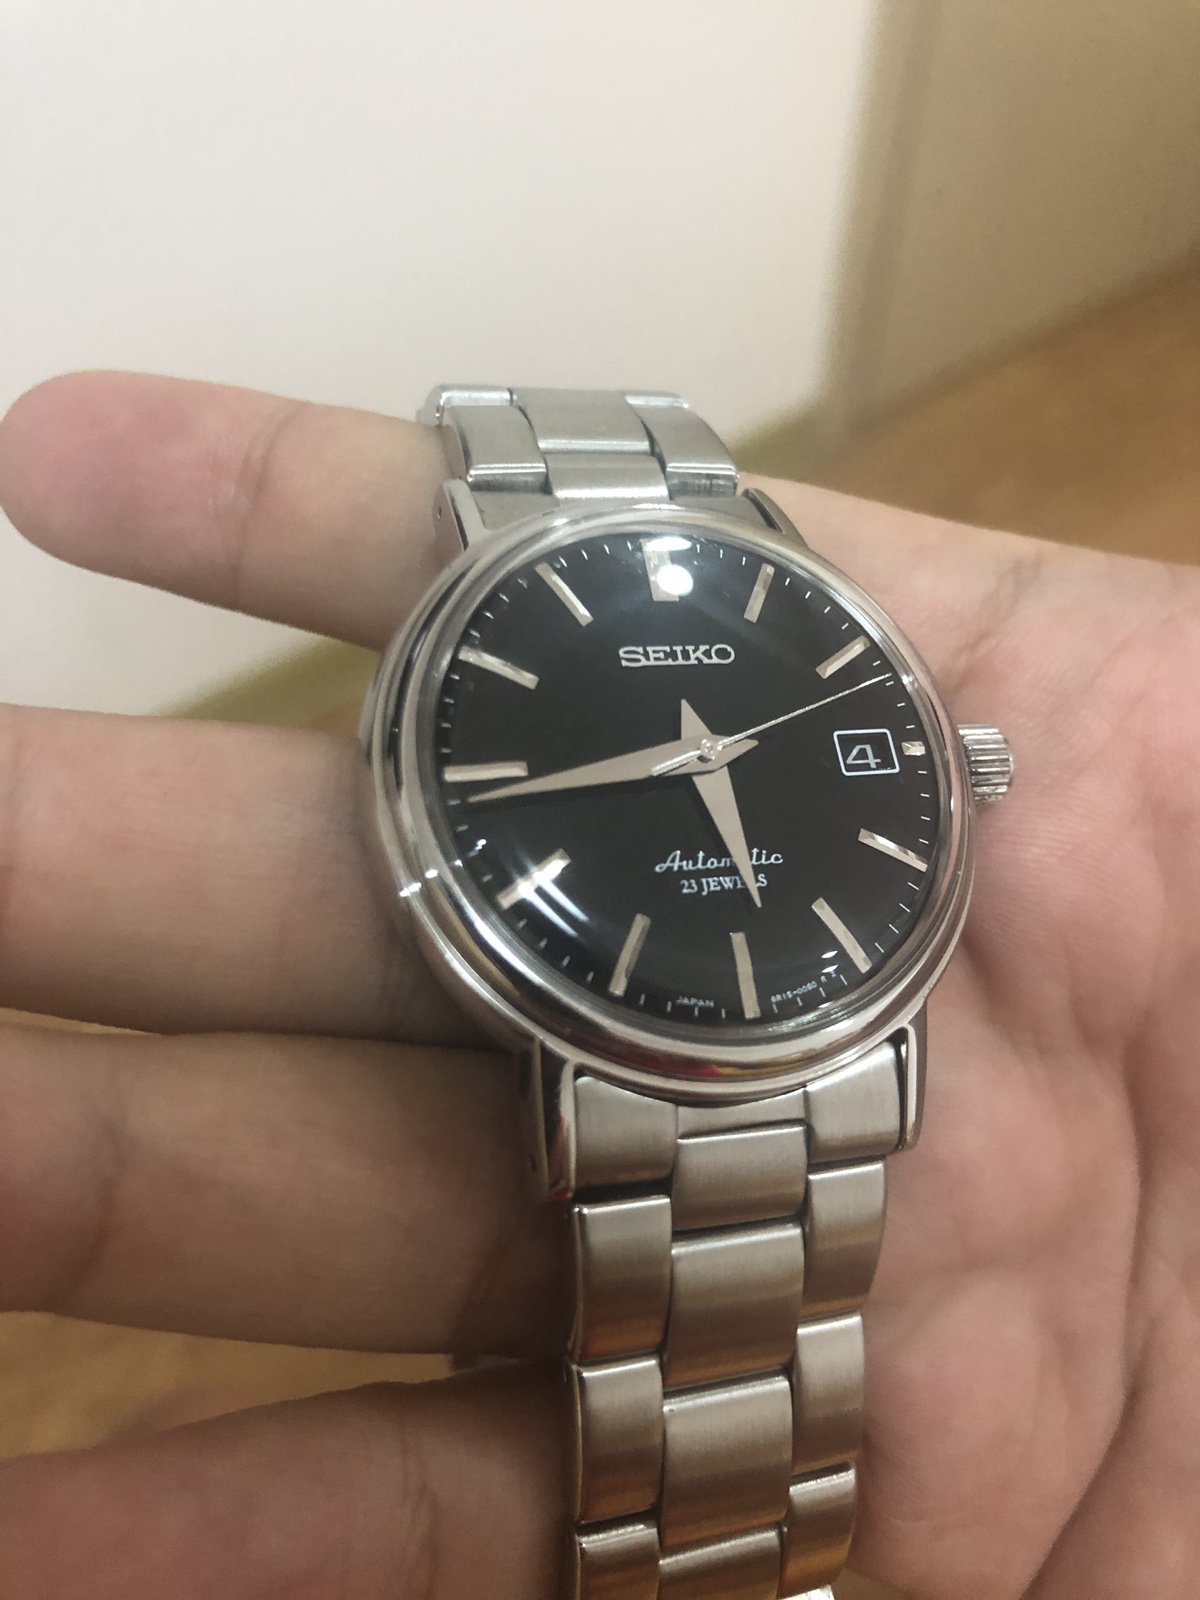 FS] AMAZING RARE SEIKO SARB029 IN VERY GOOD CONDITION | WatchCharts